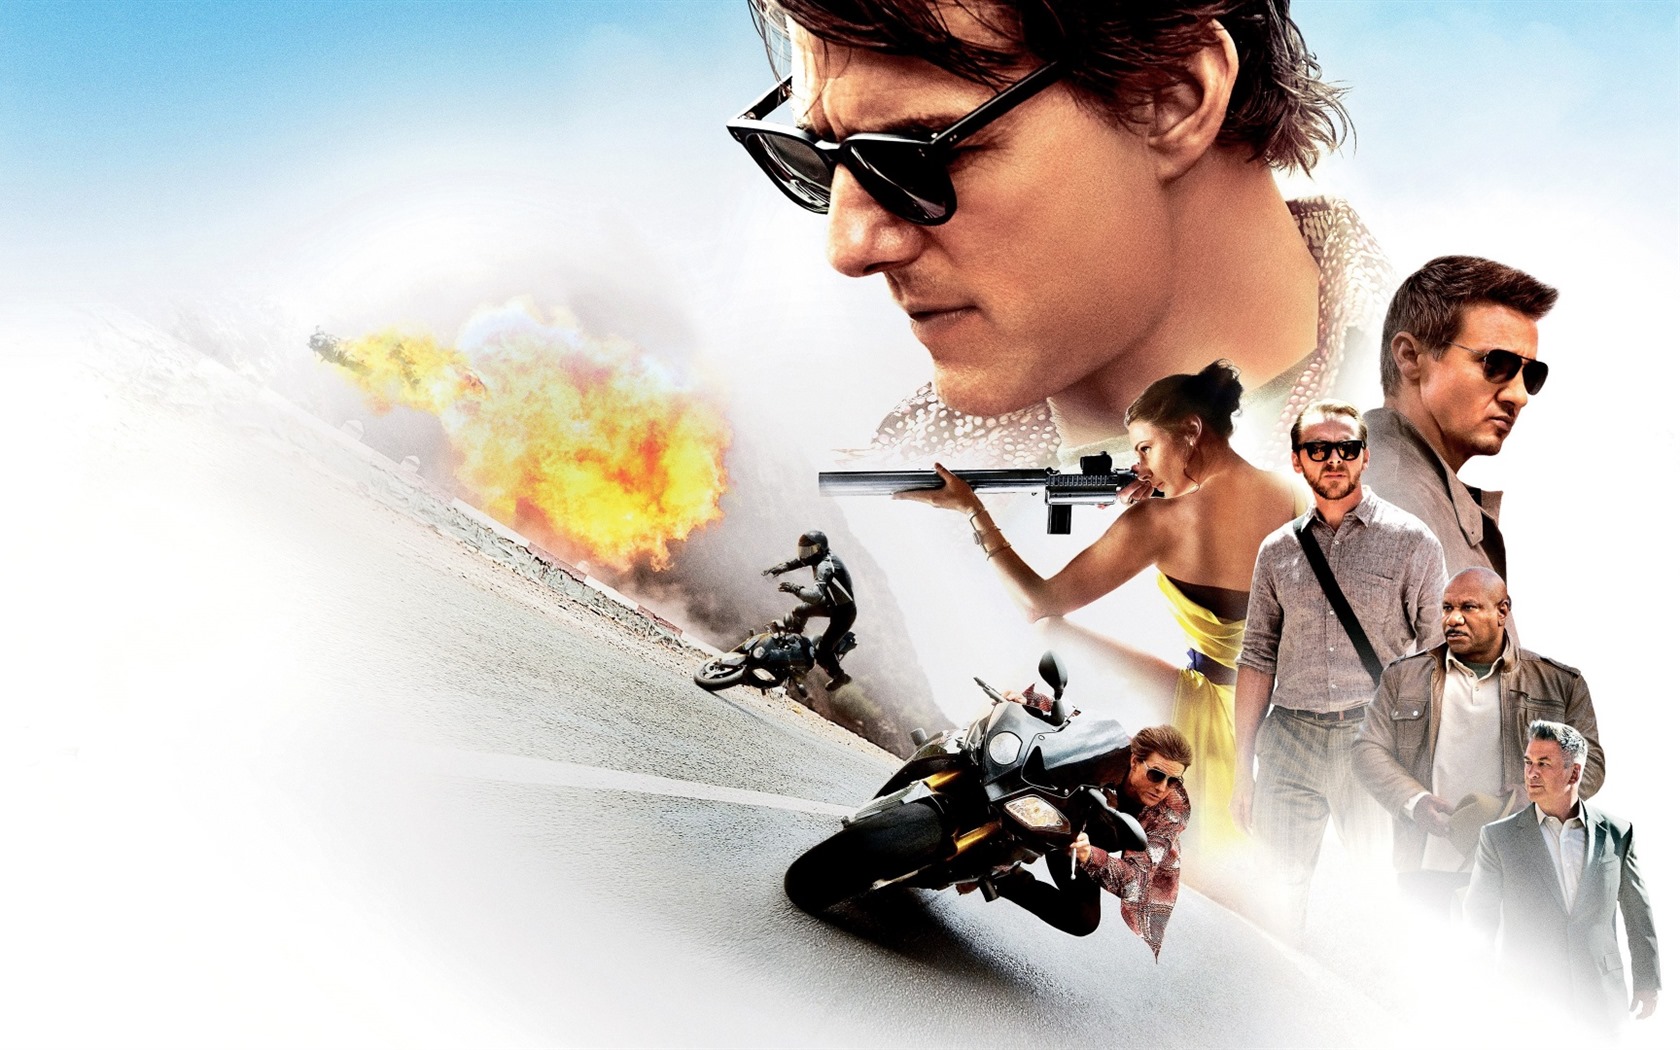 Mission Impossible: Rogue Nation, HD movie wallpapers #1 - 1680x1050